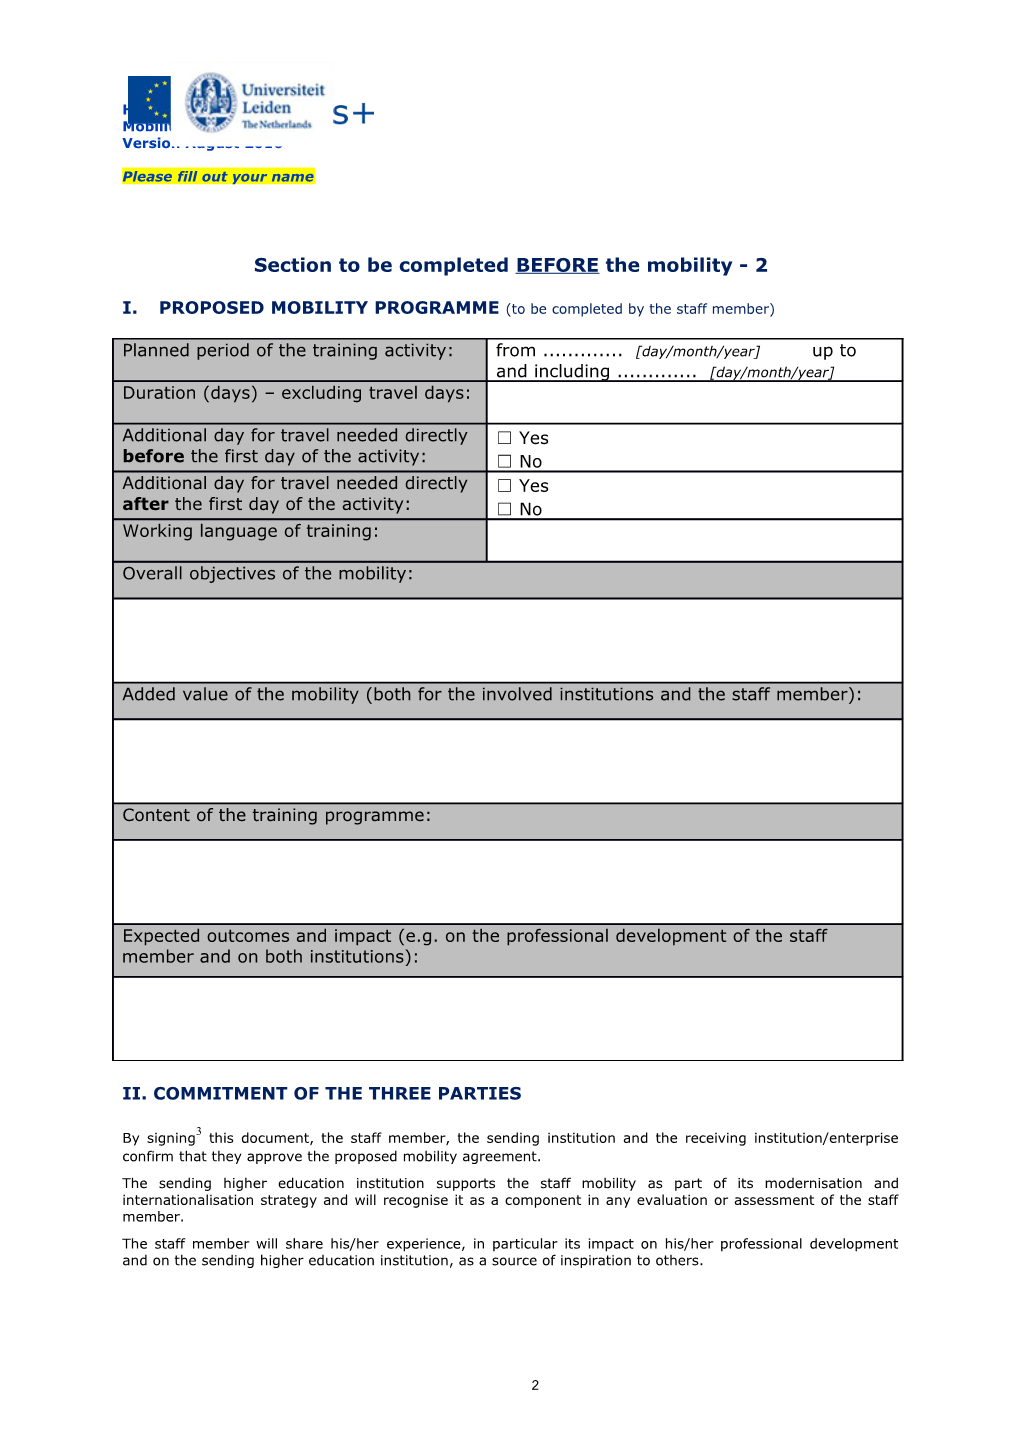 Annex 2. Mobility Agreement - Staff Mobility for Training